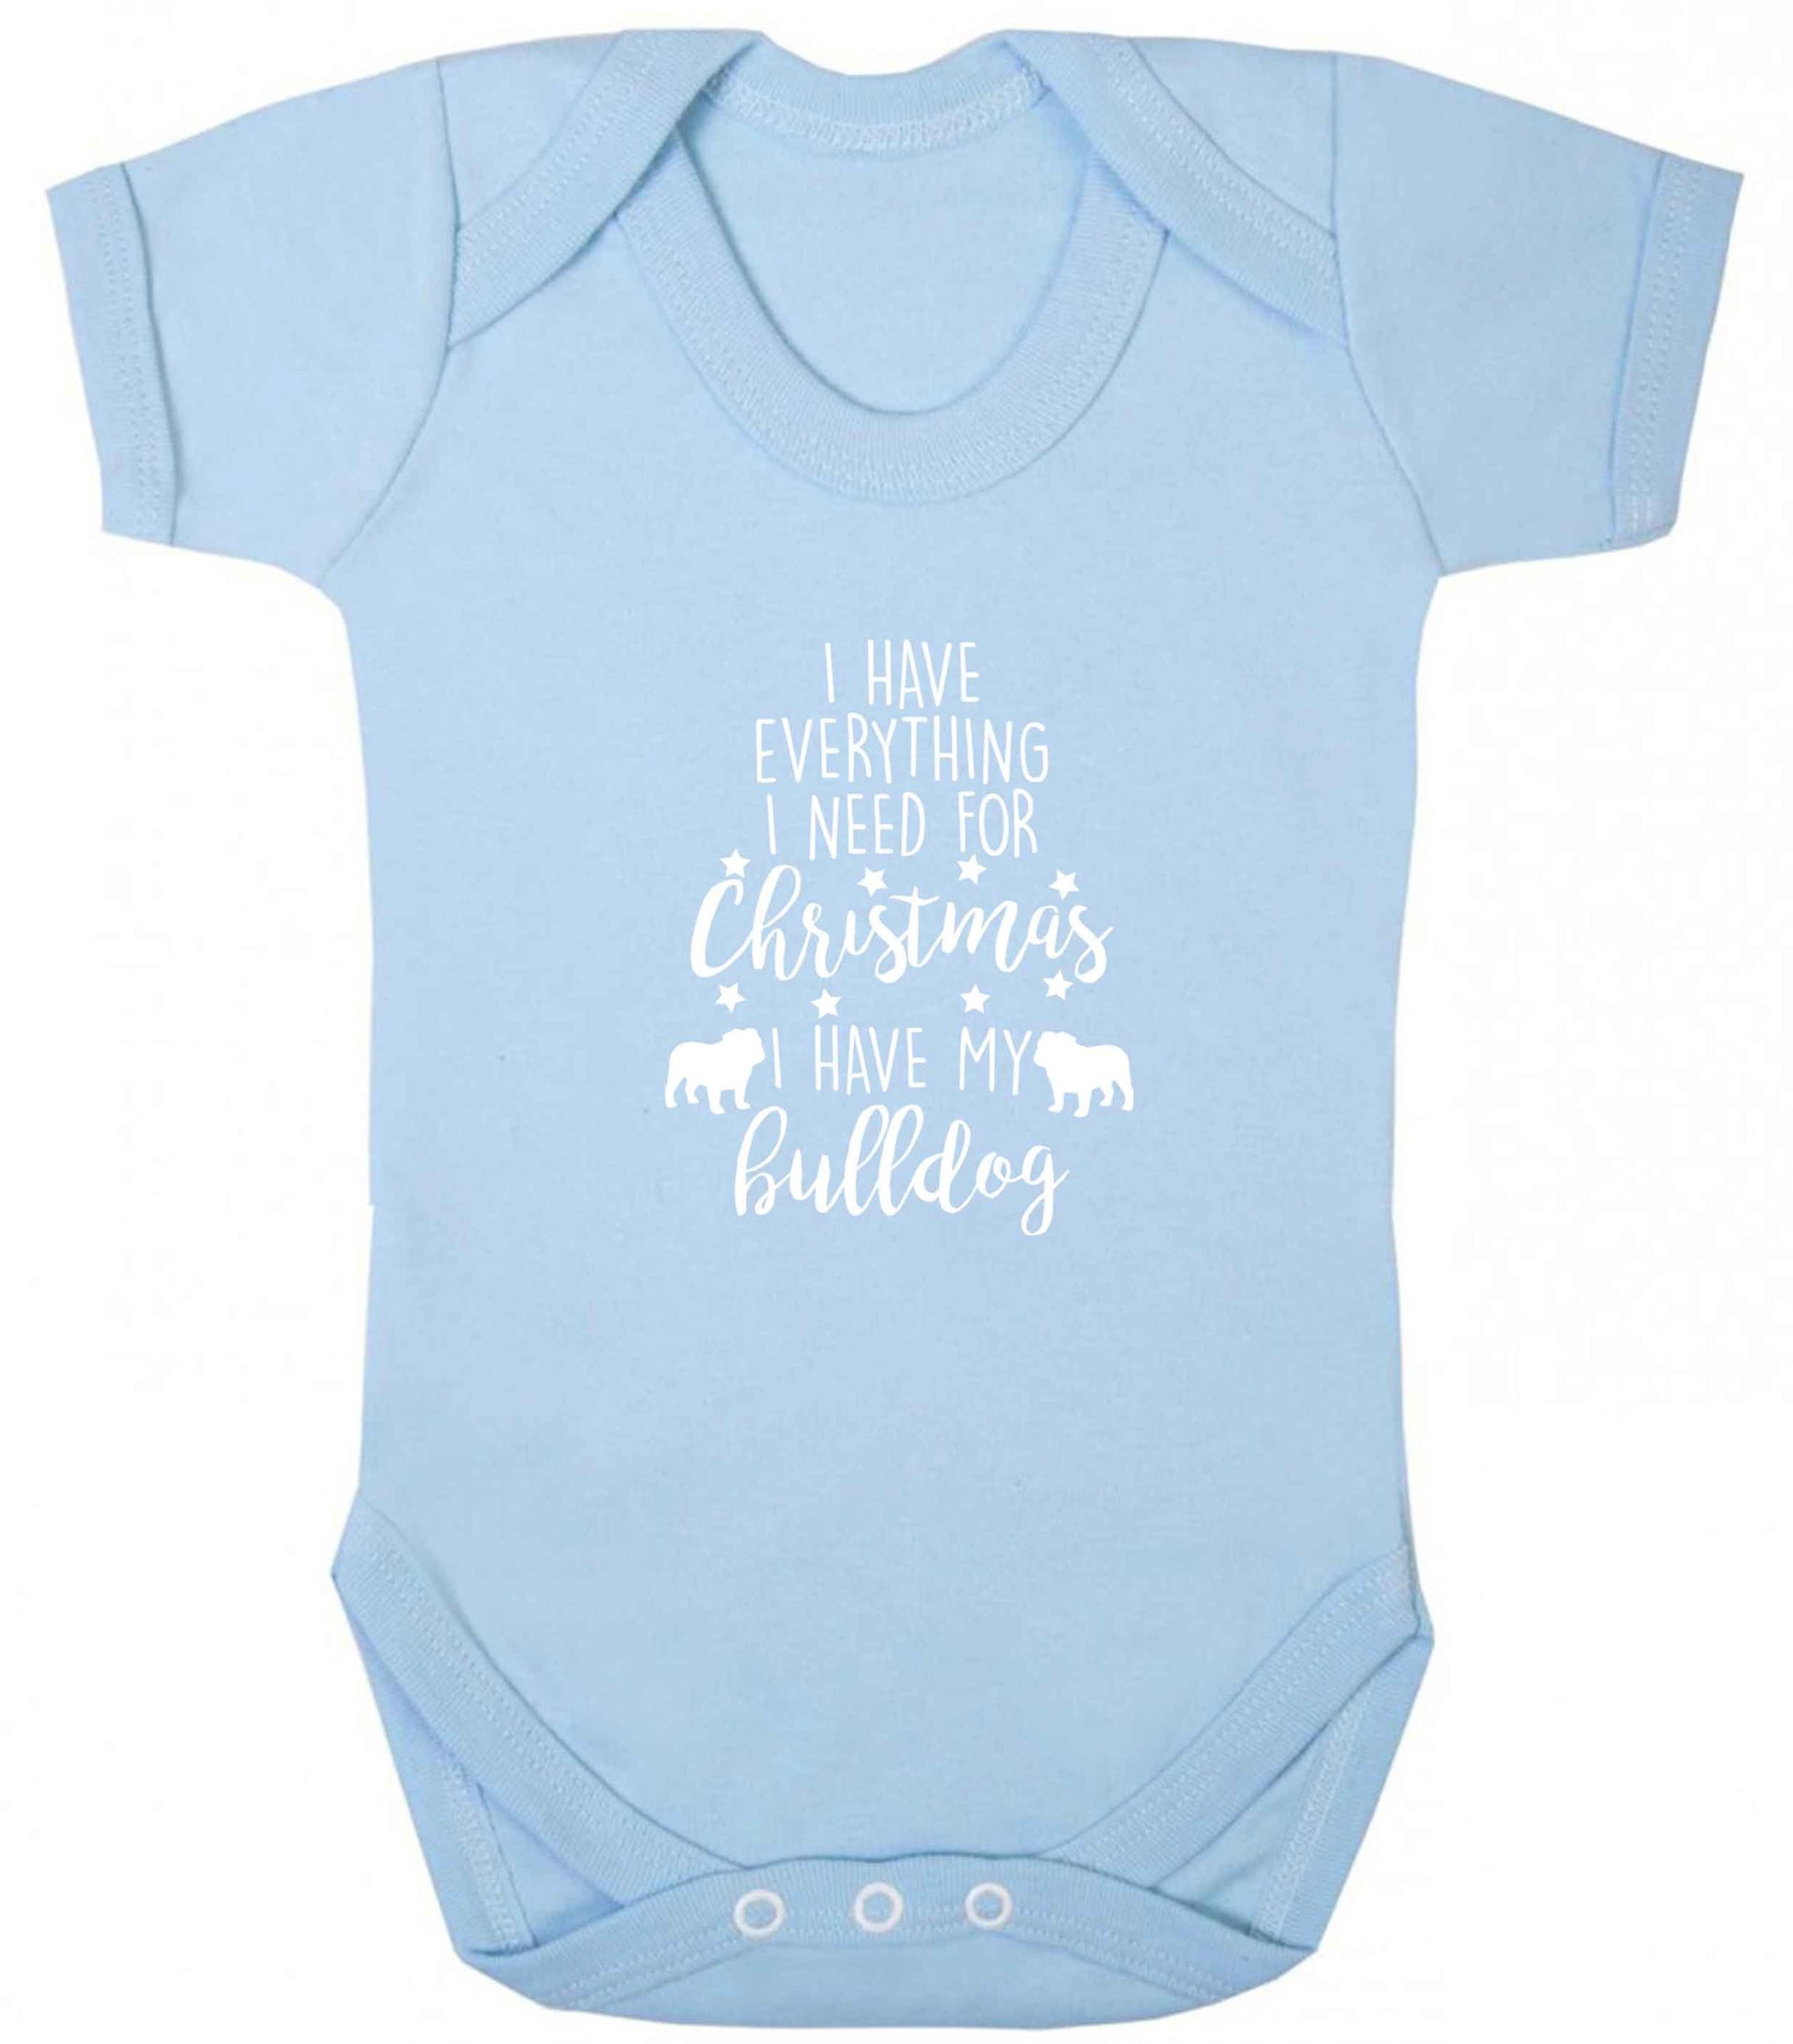 I have everything I need for Christmas I have my bulldog baby vest pale blue 18-24 months